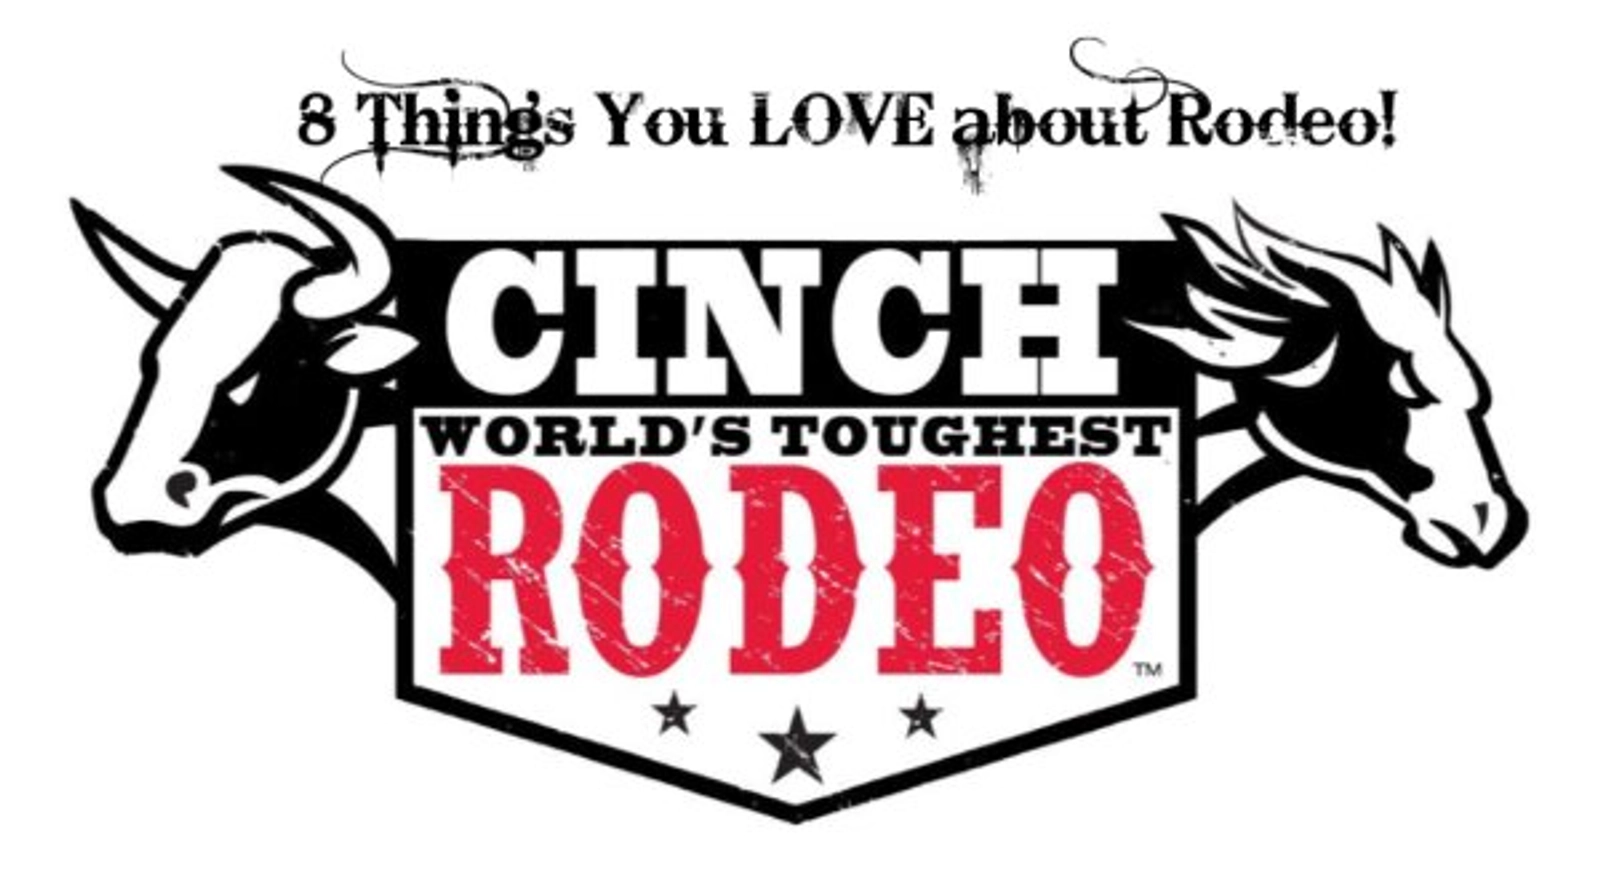 Choose 8 Things You Love about the Cinch World's Toughest Rodeo! - Thumbnail Image